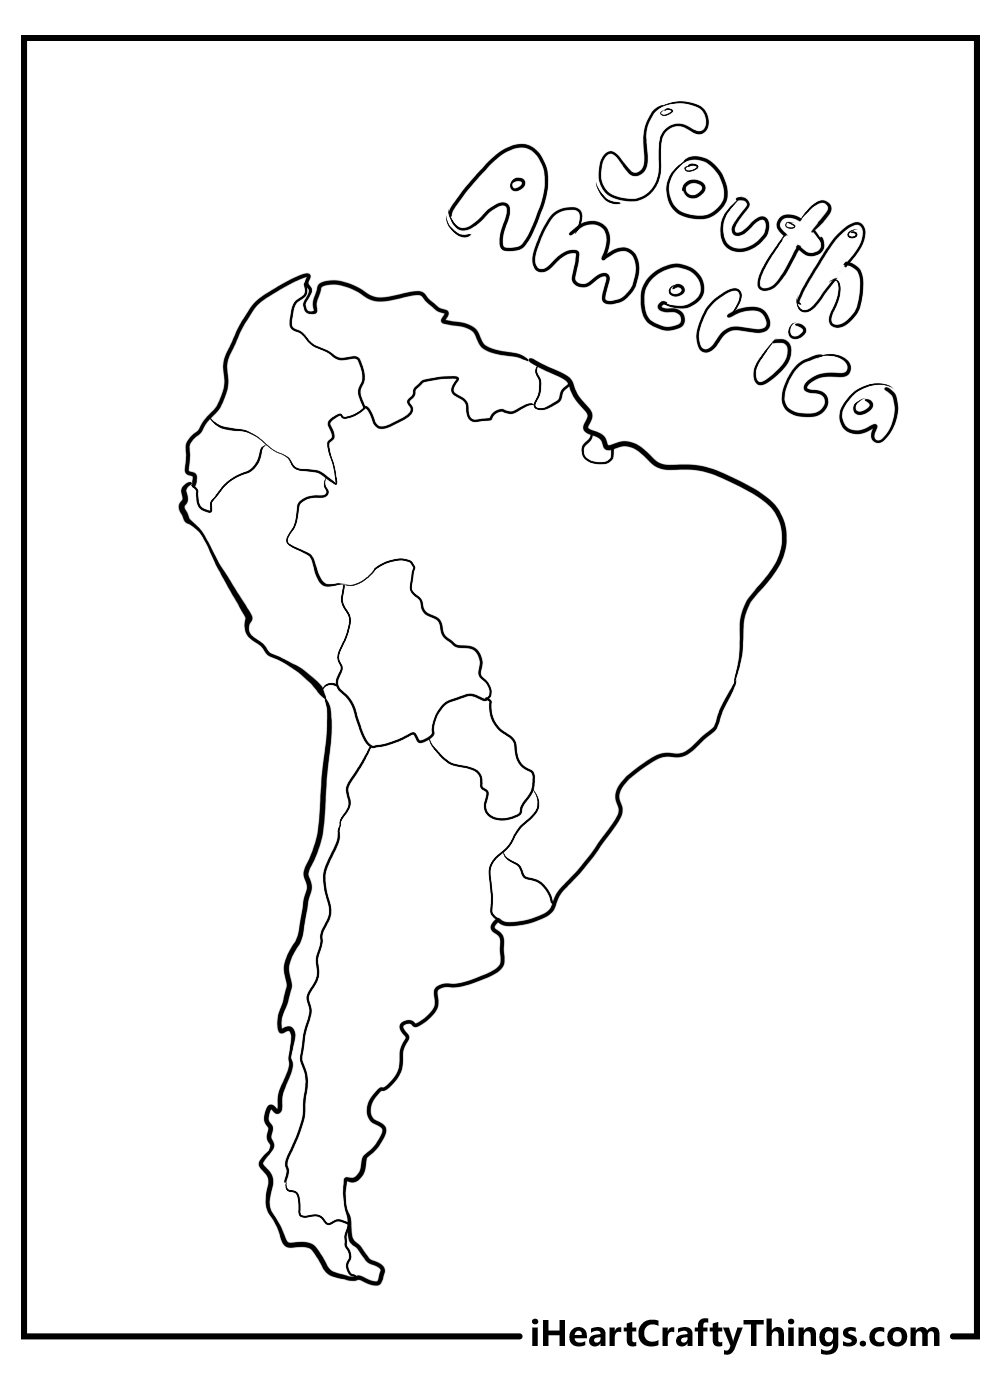 black-and-white world map coloring pages